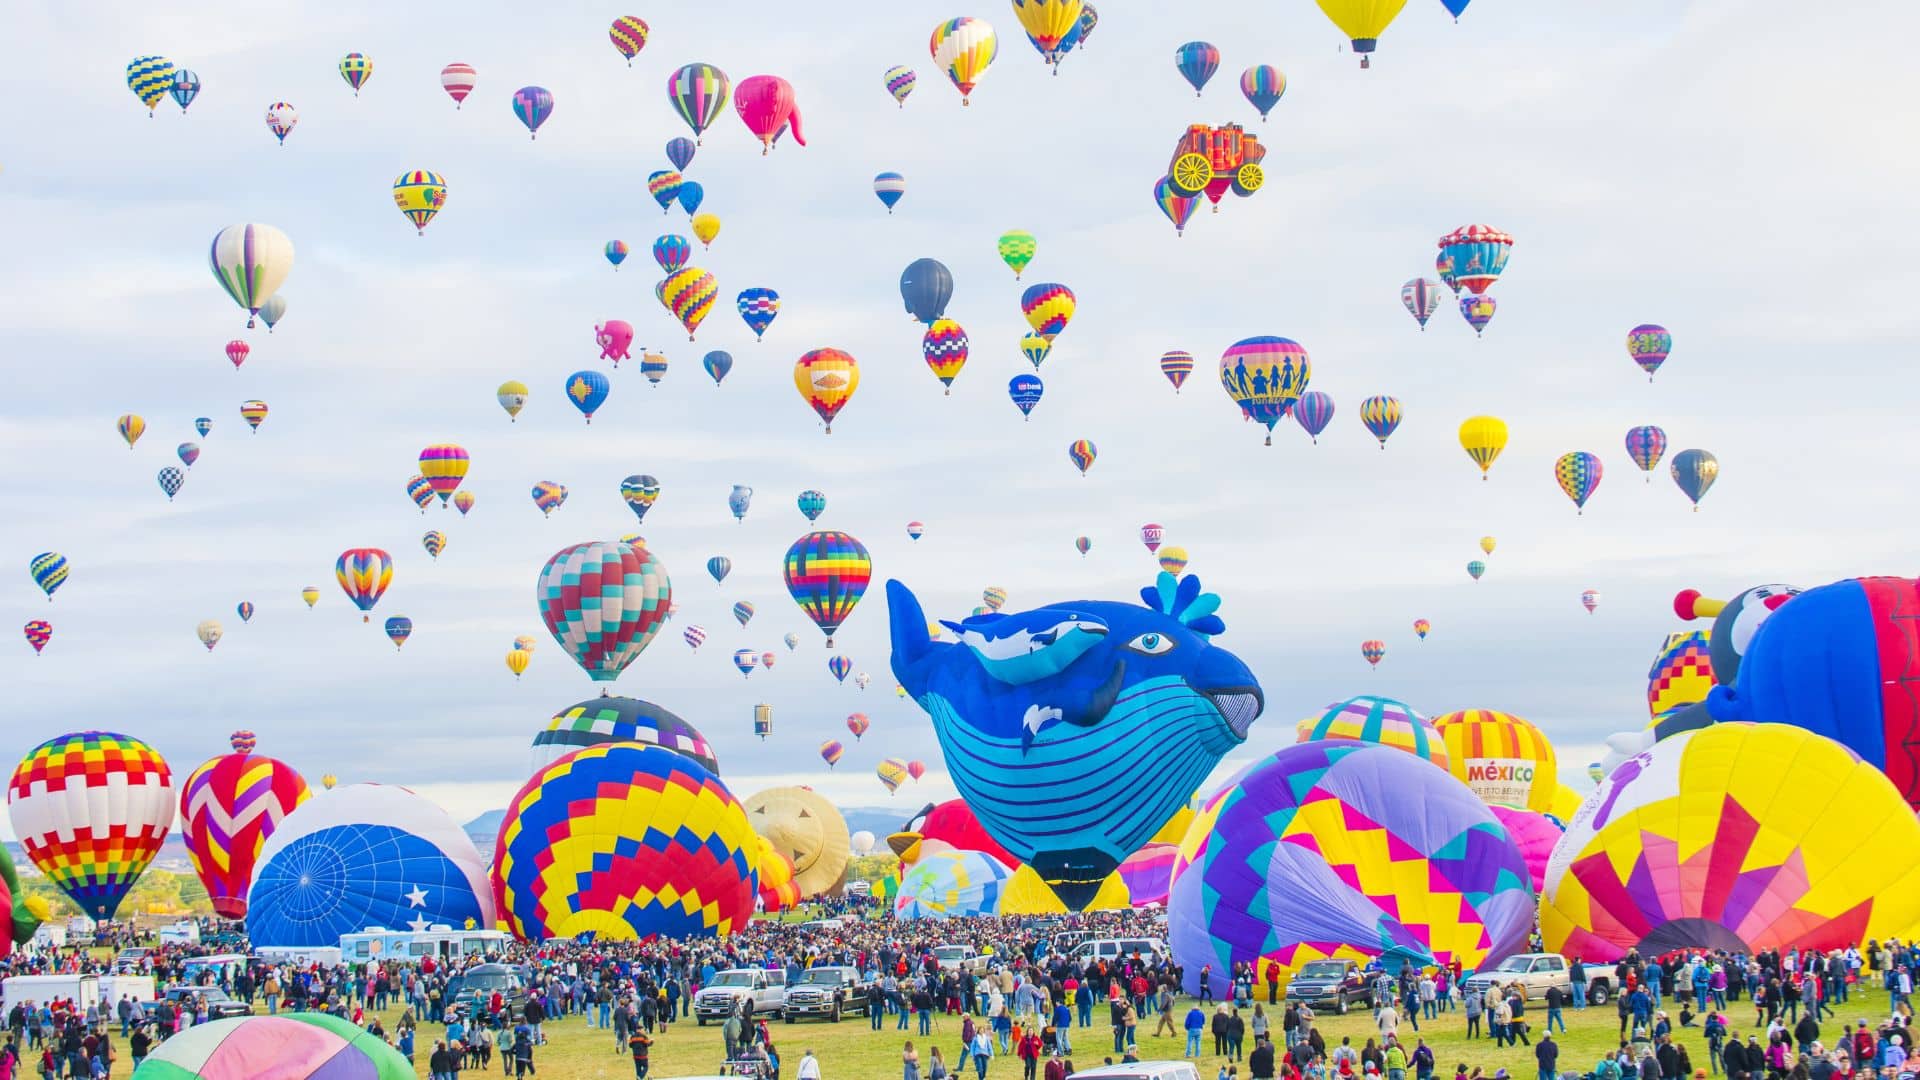 Array of brightly colored hot air balloons floating up towards blue skies with soft white clouds and crowds on the ground